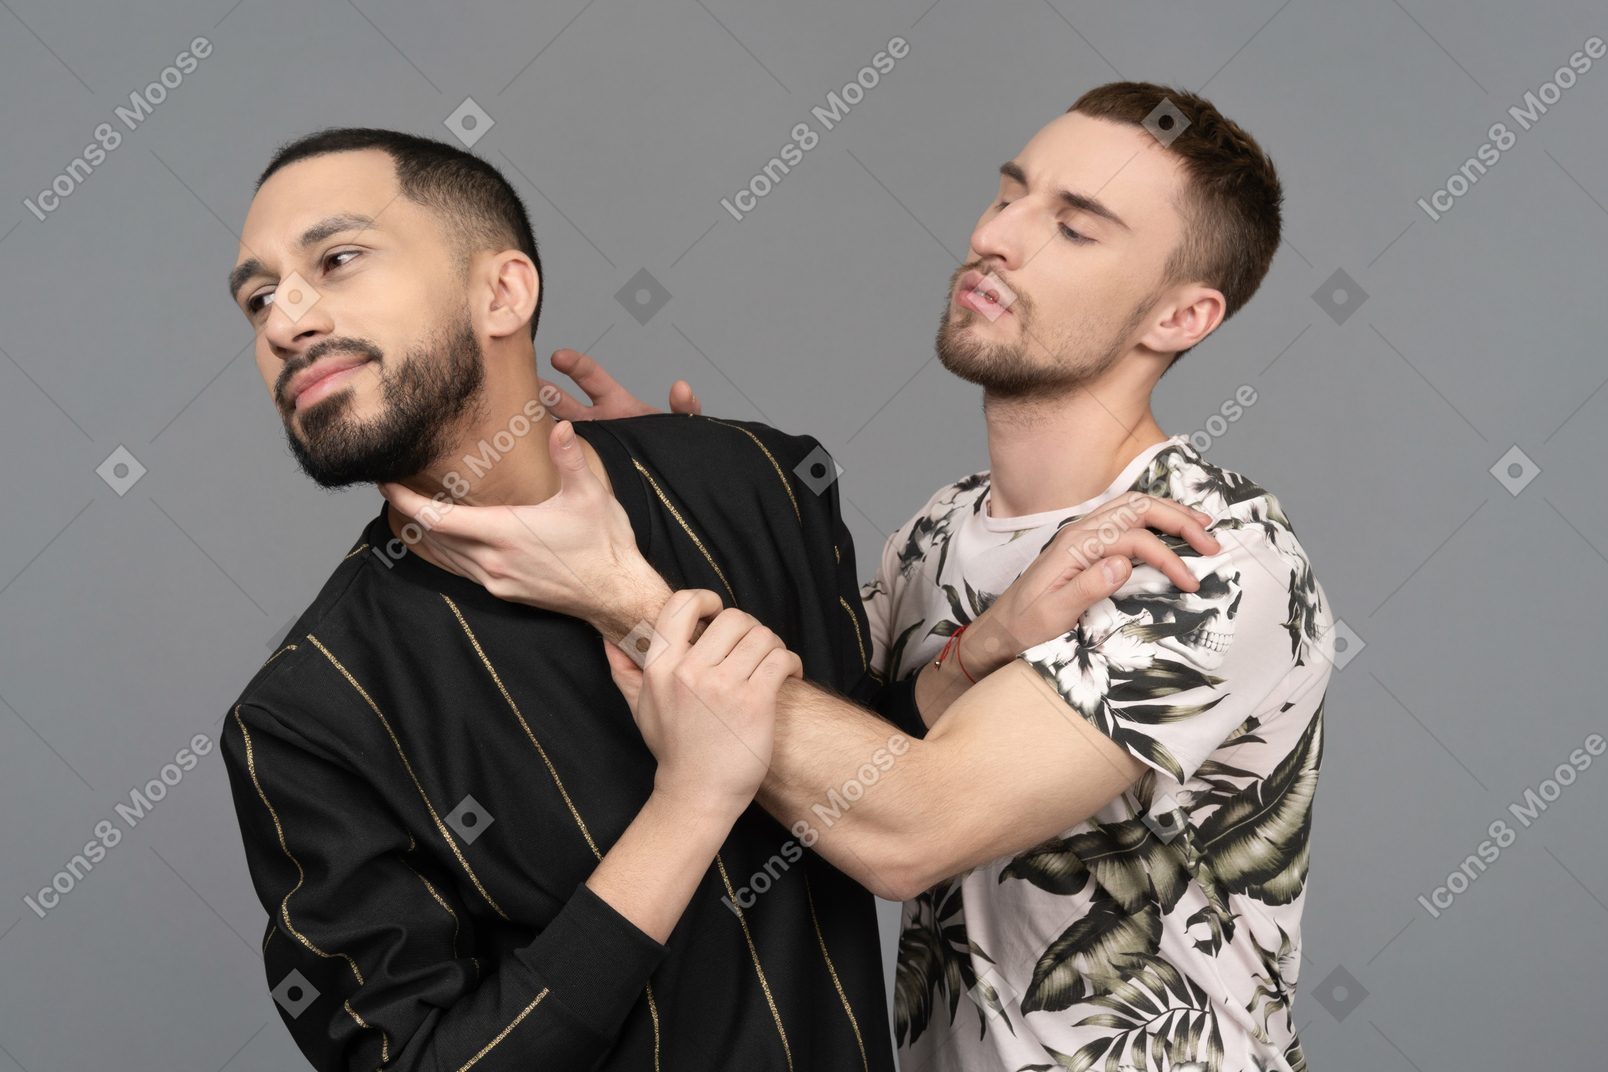 Young caucasian man trying to turn the other one's head back to him by the neck